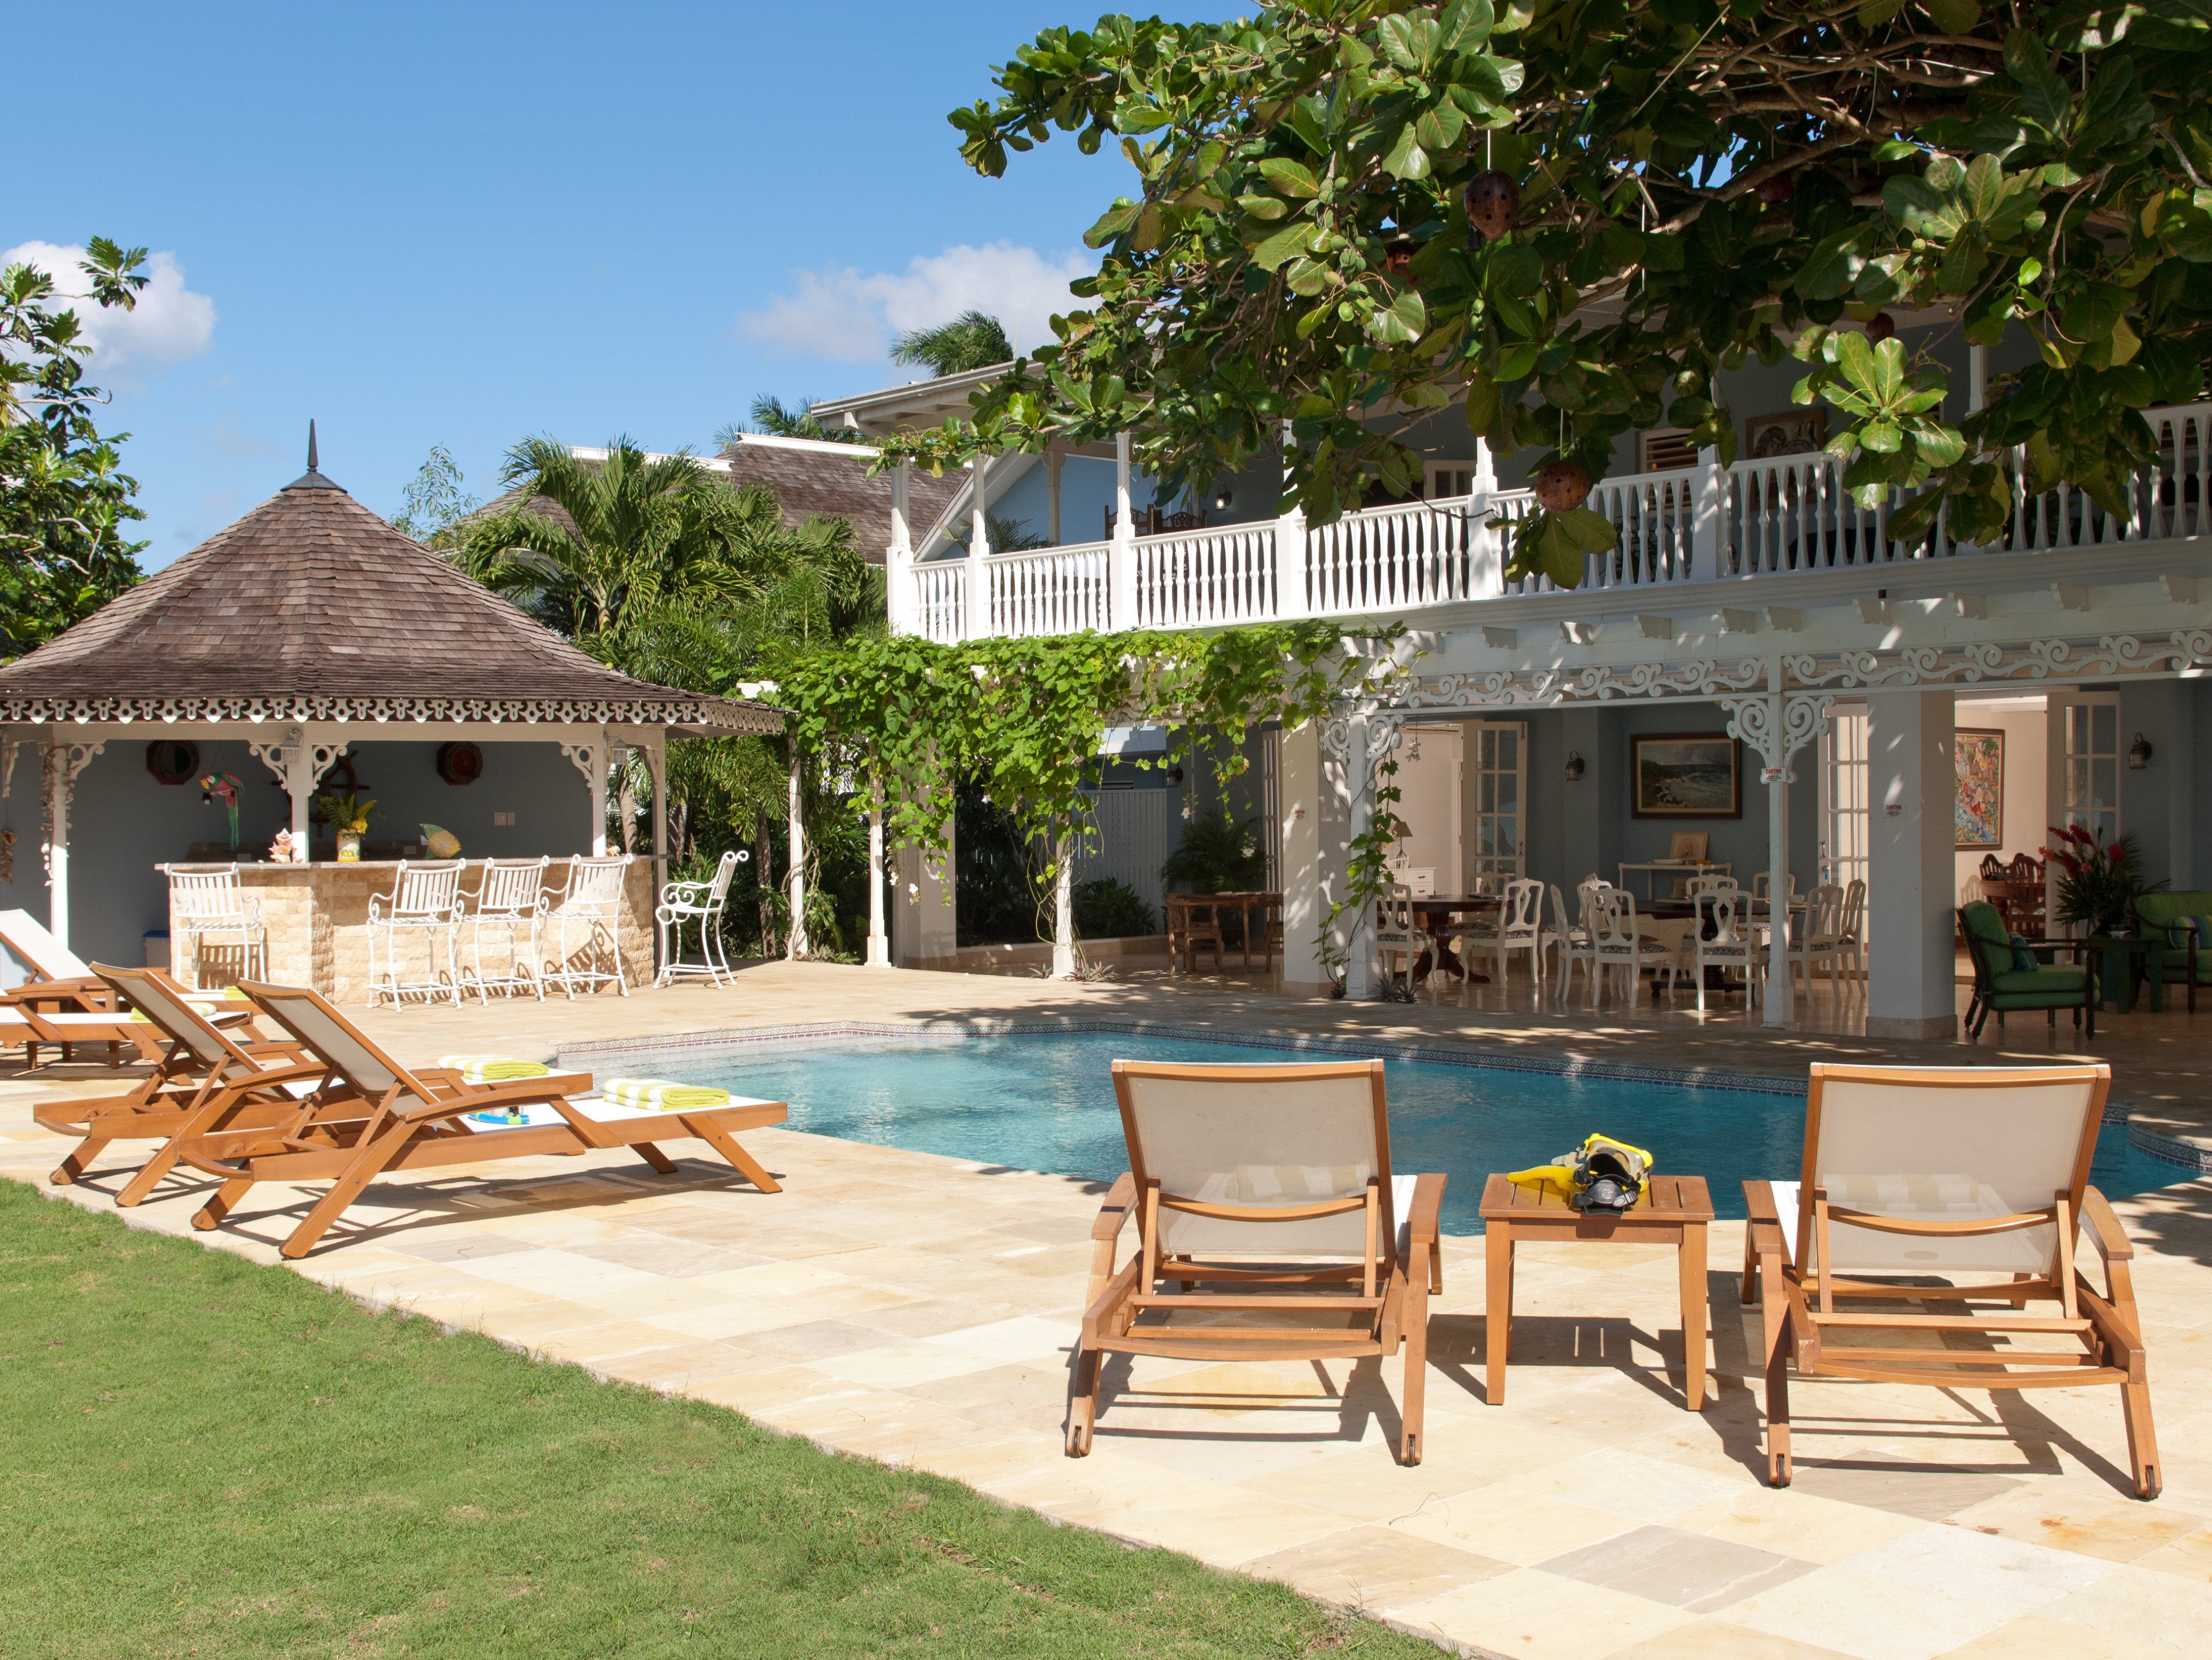 A Summer Place on the Beach - Discovery Bay villa with pool